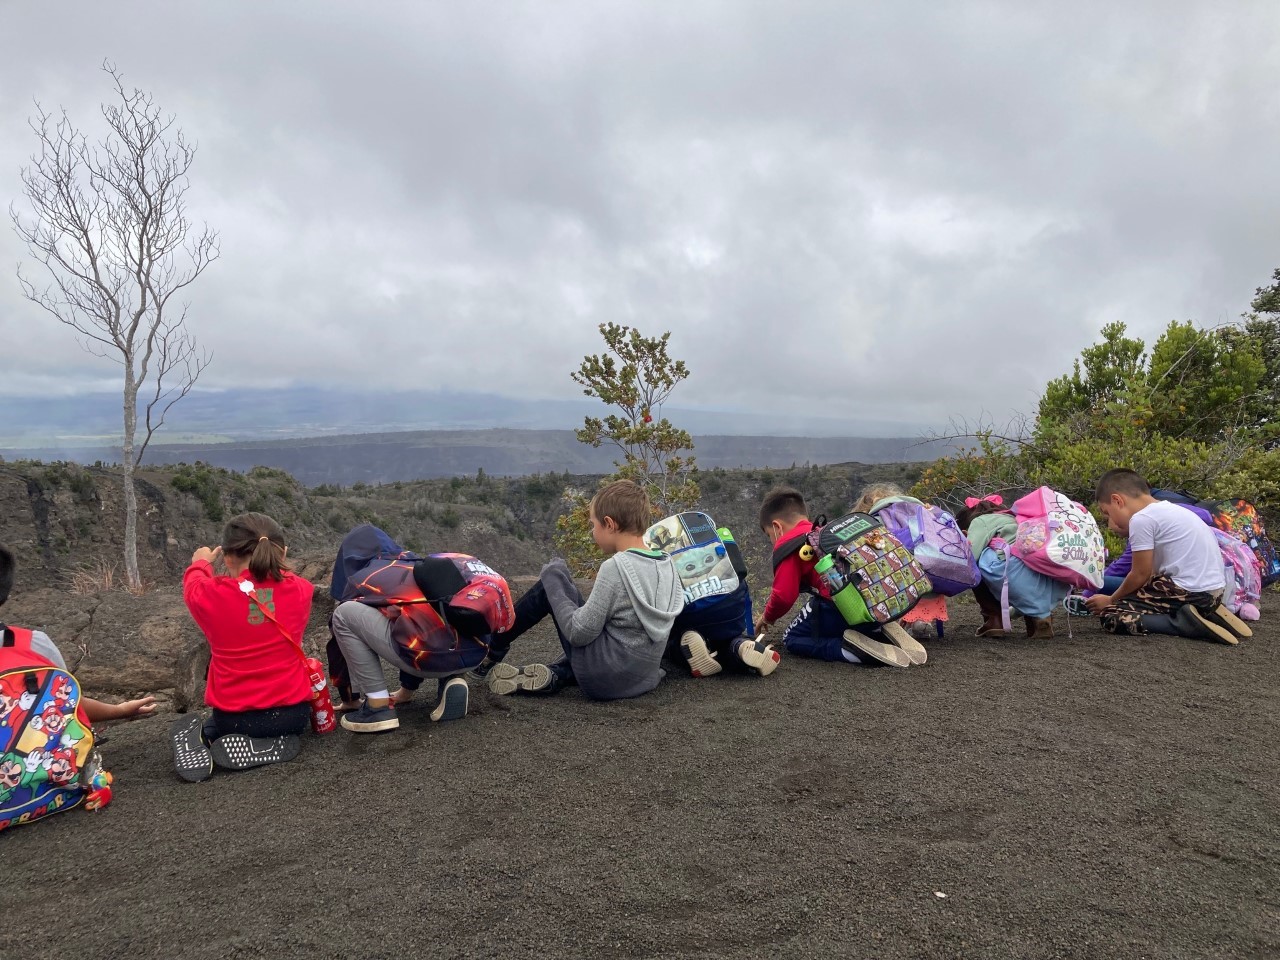 School children sit at the edge of a large gray crater